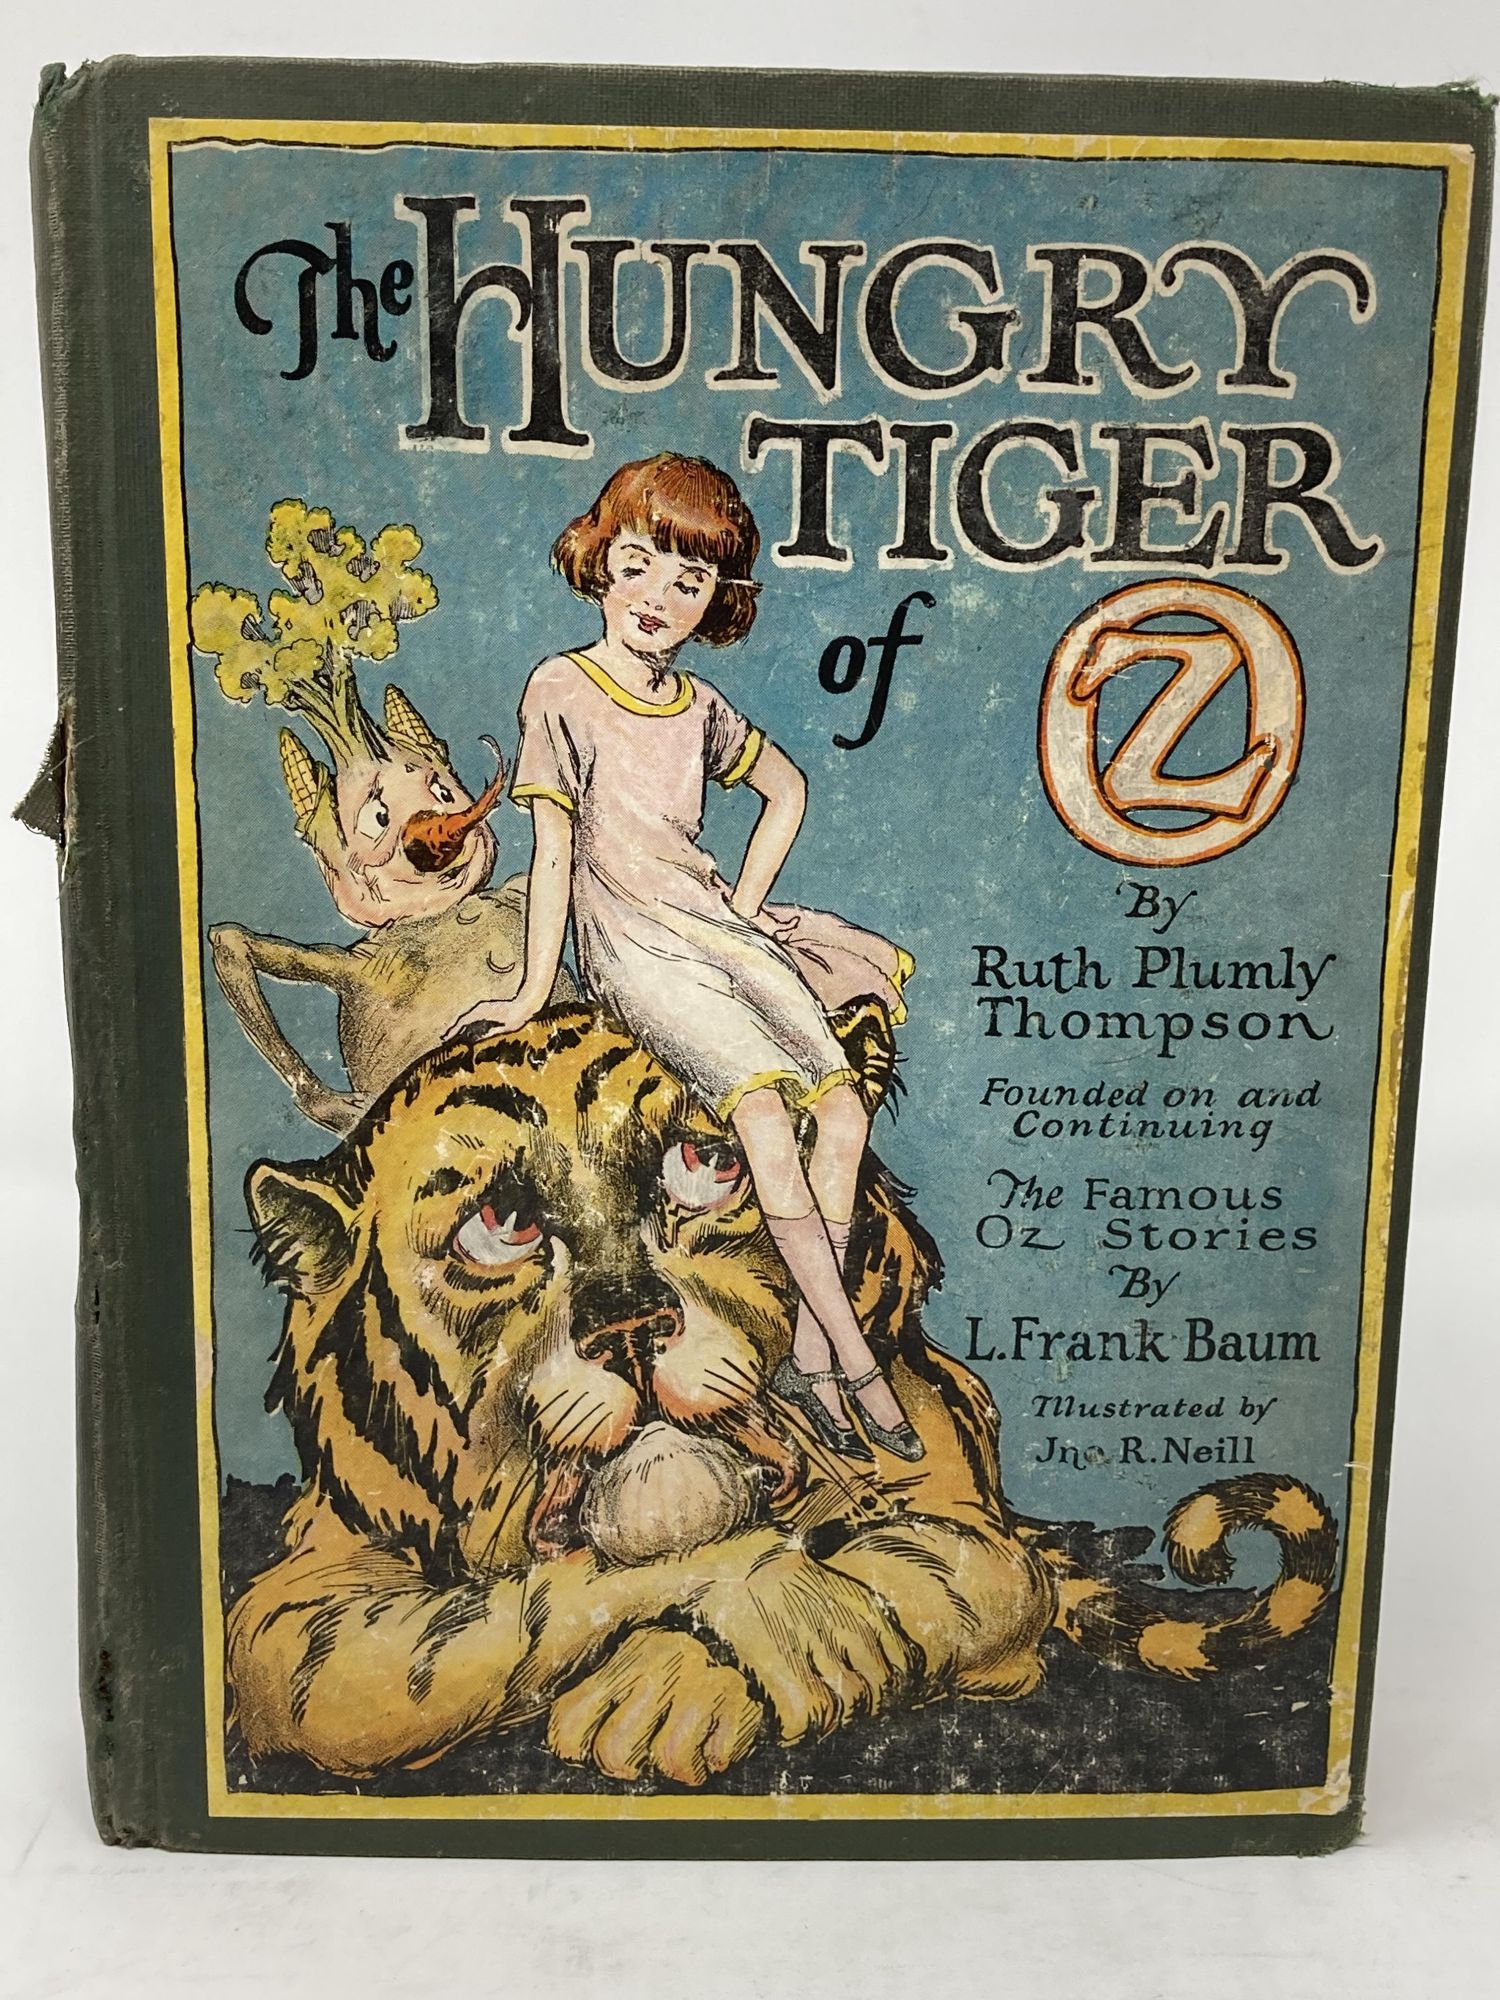 Thompson, Ruth Plumly - The Hungry Tiger of Oz